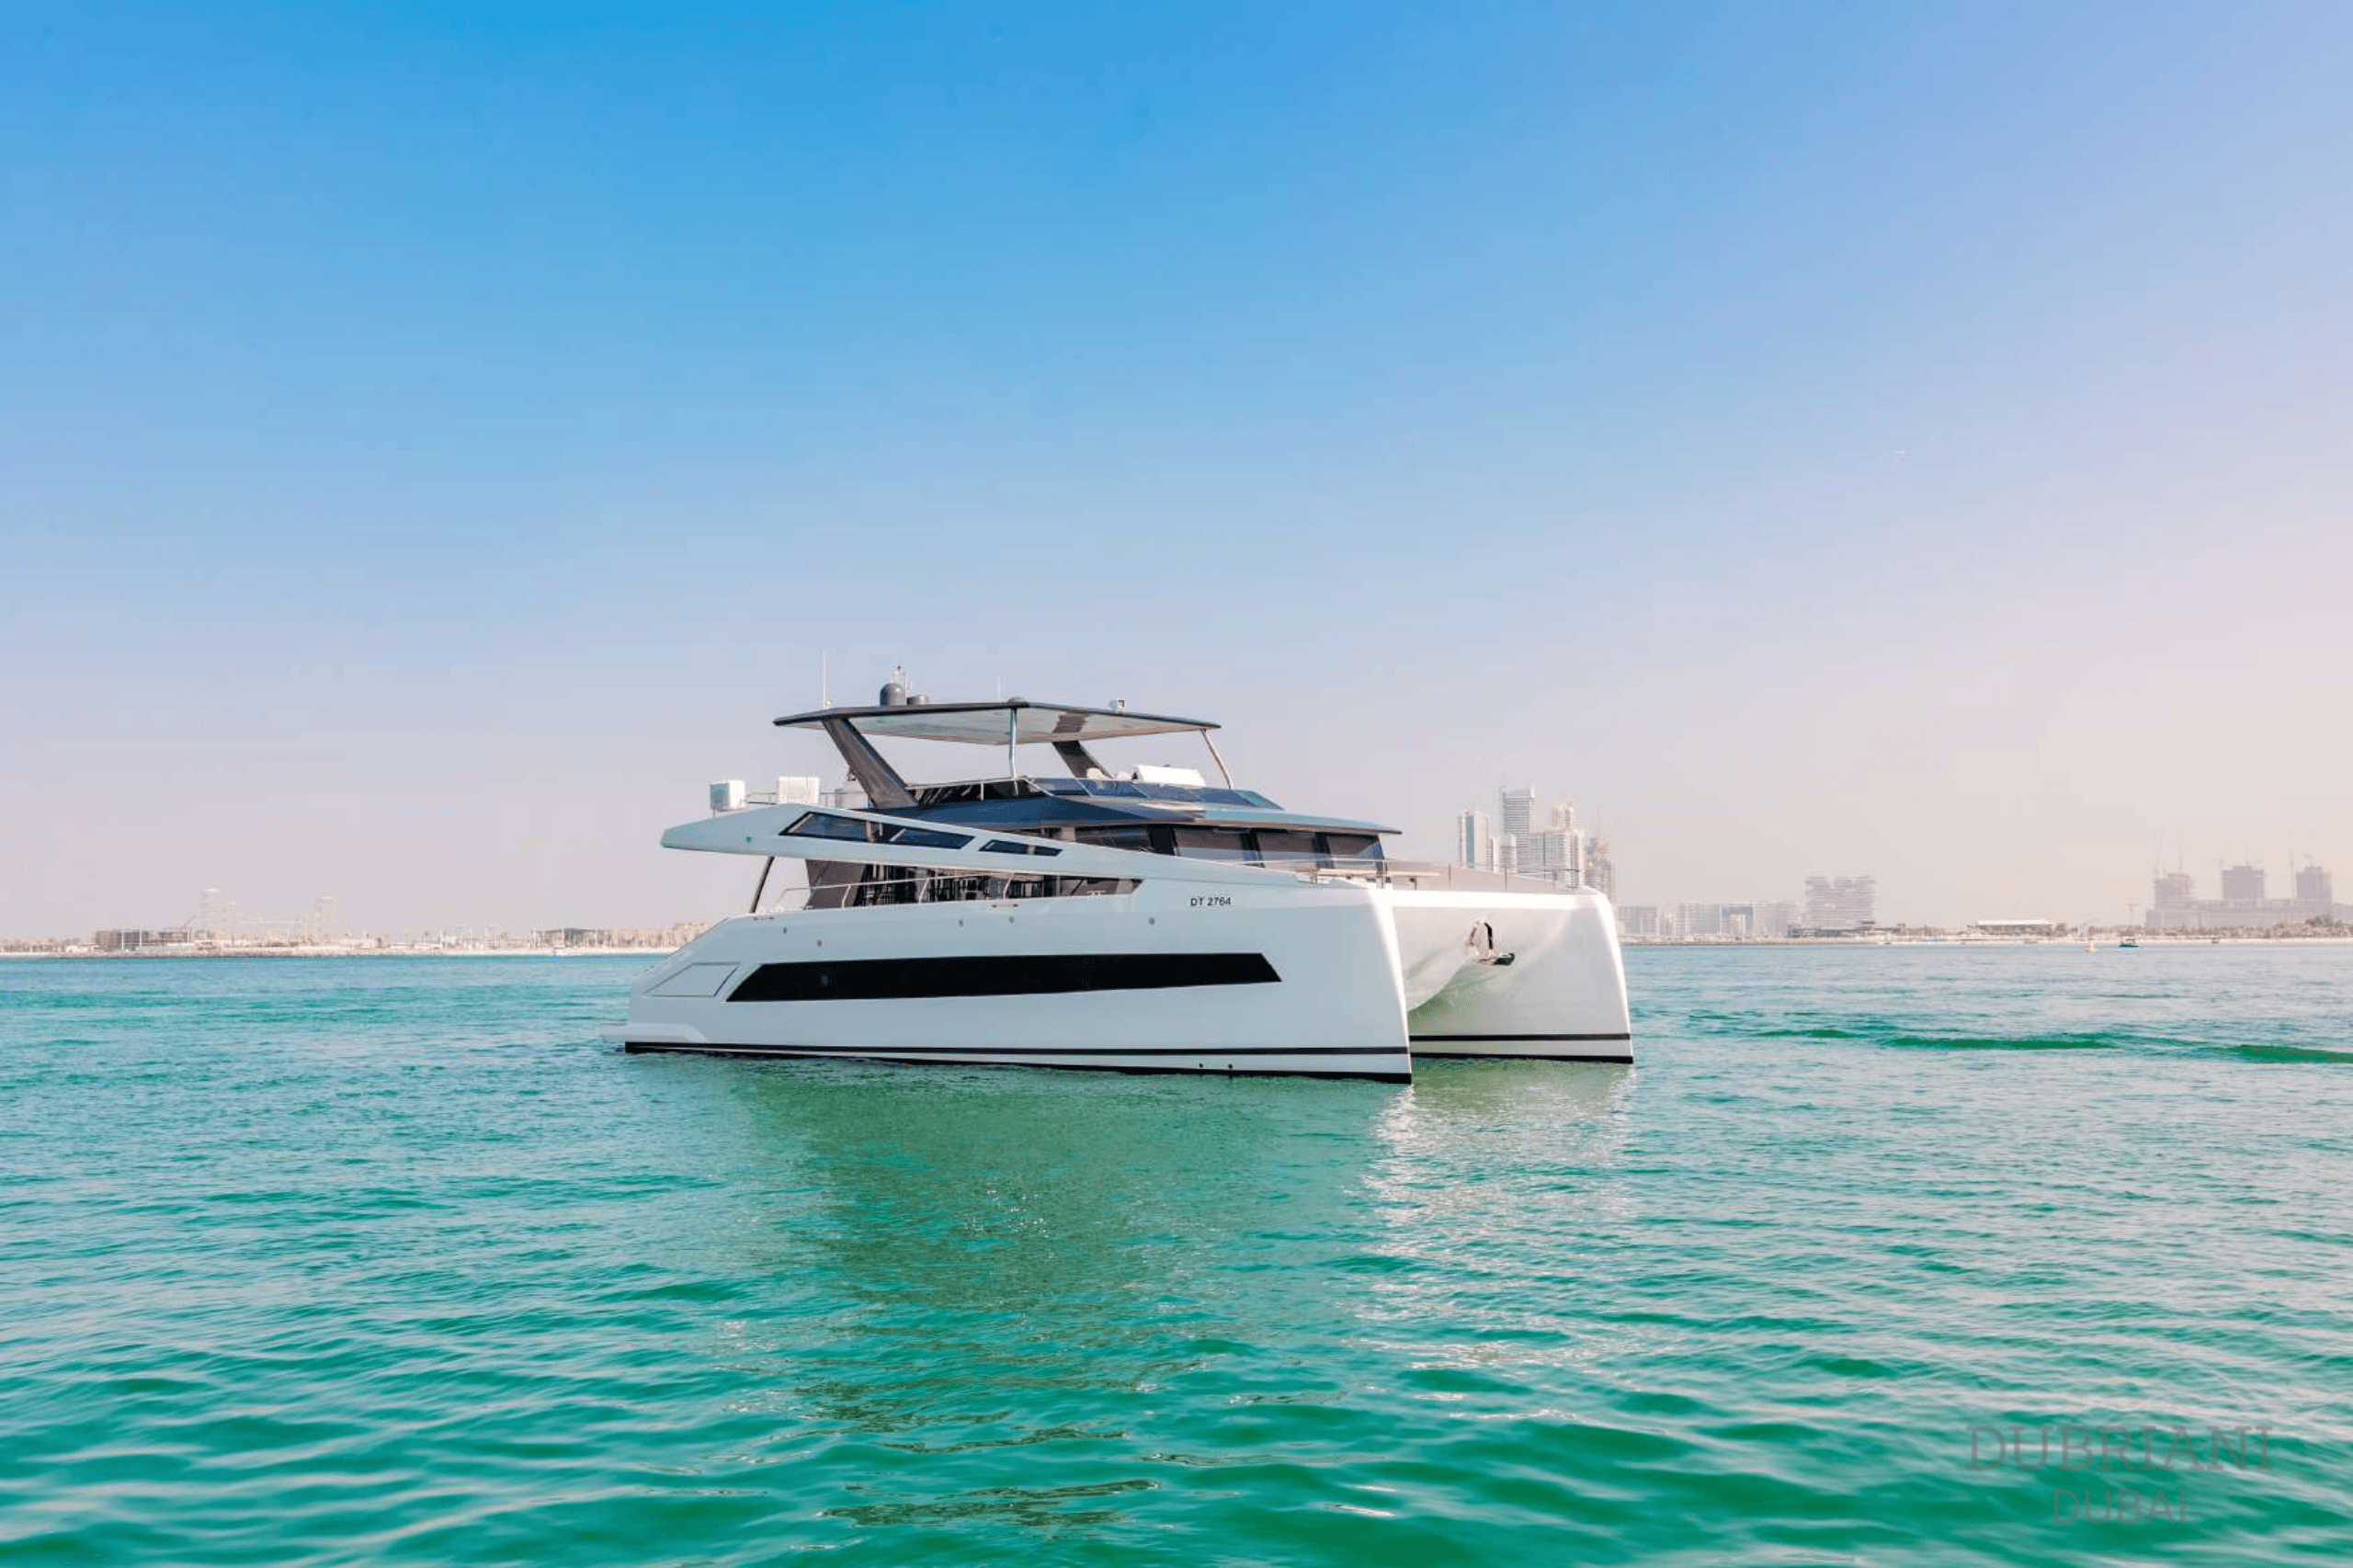 Experience luxury on the water with our Dubai catamaran yacht charter. Perfect for up to 45 guests. View the images now!